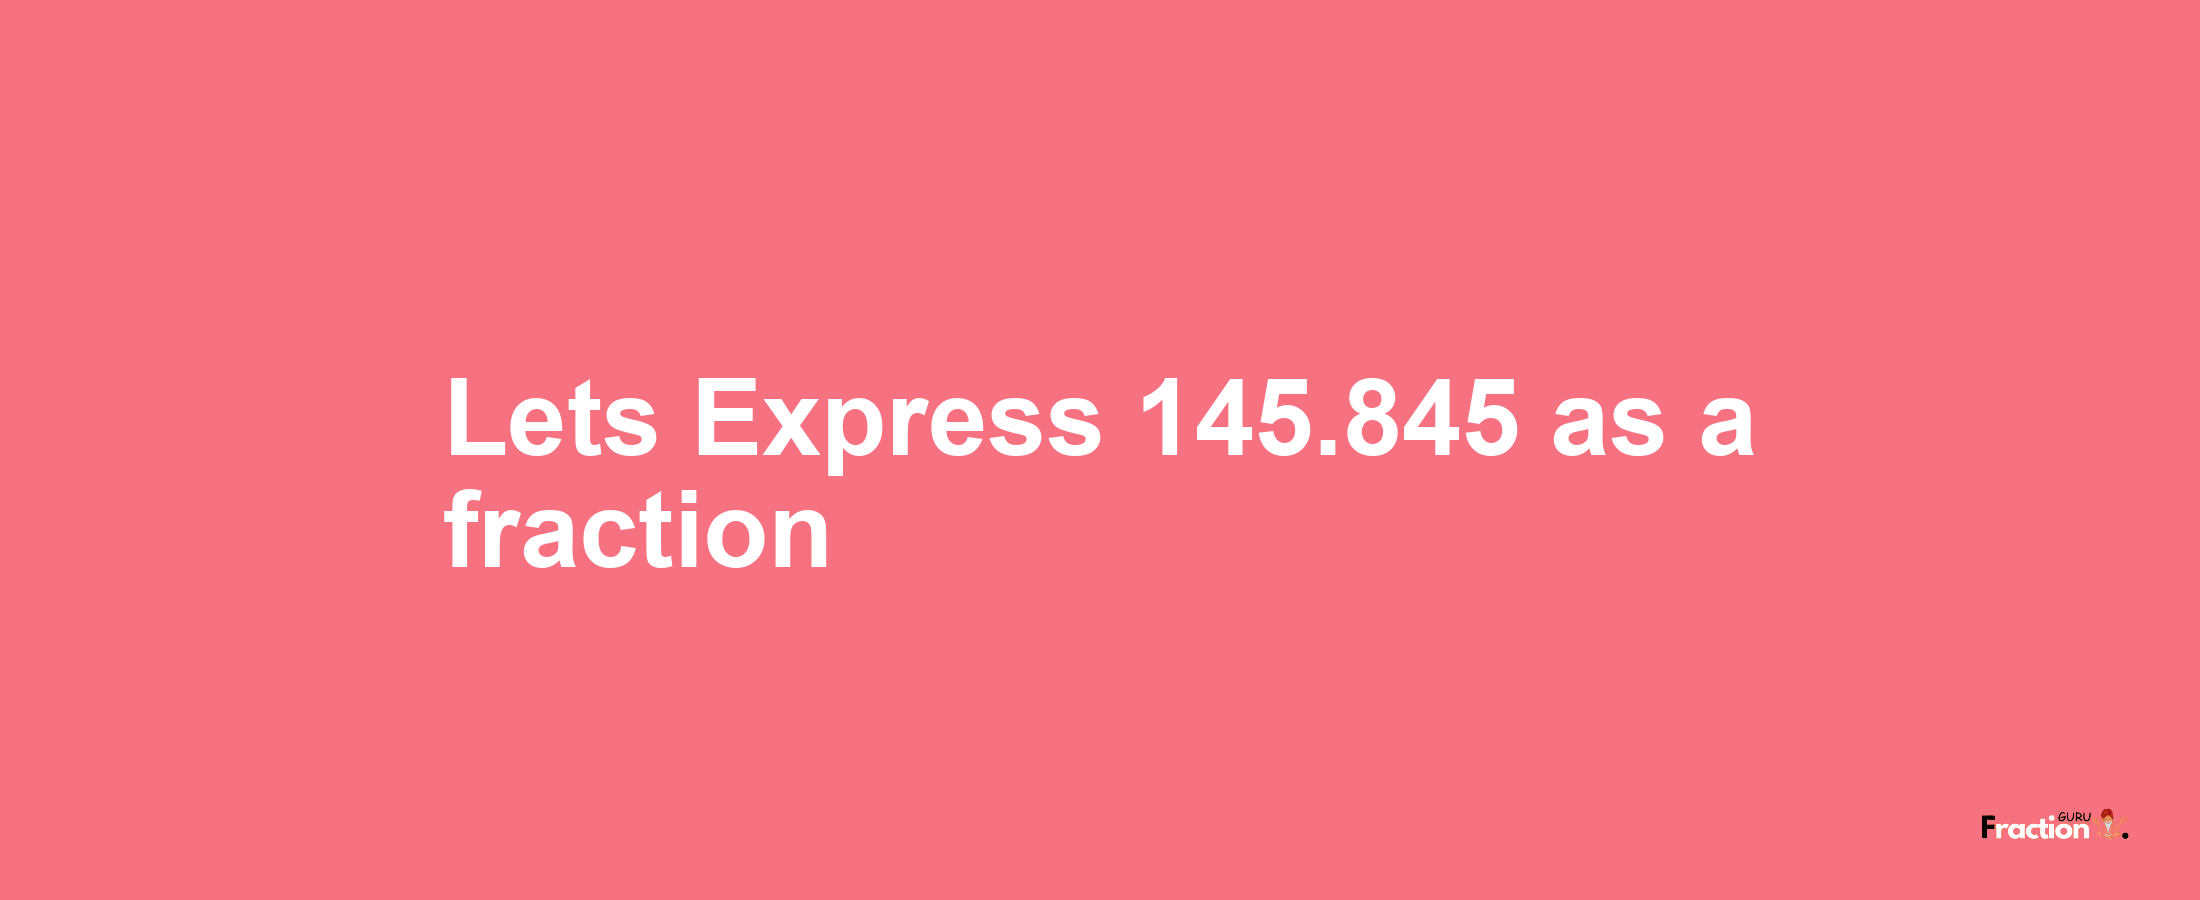 Lets Express 145.845 as afraction